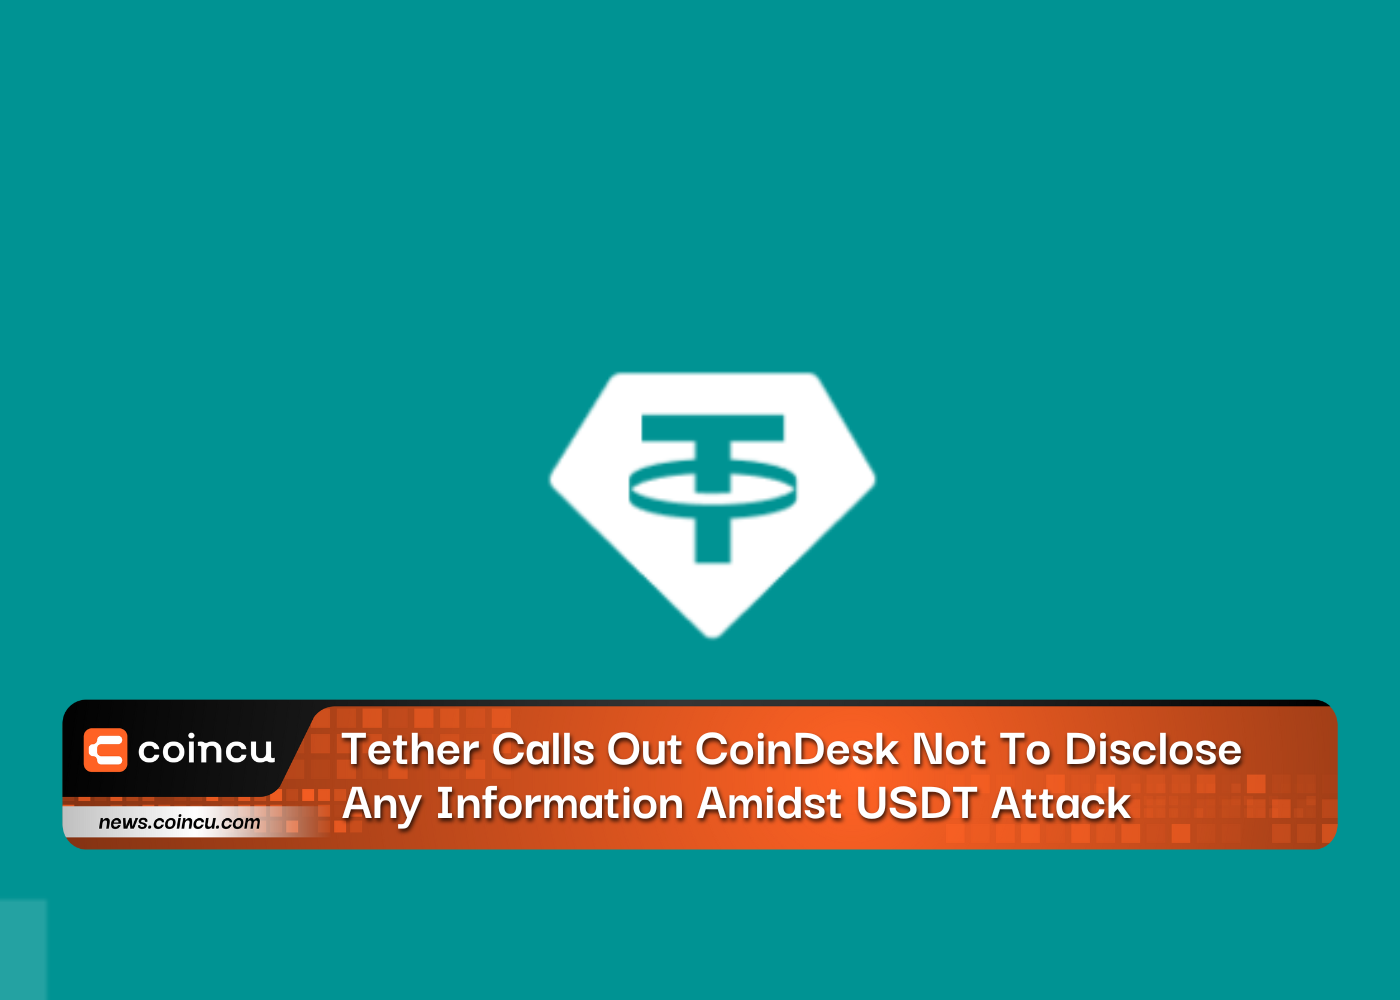 Tether Calls Out CoinDesk Not To Disclose Any Information Amidst USDT Attack